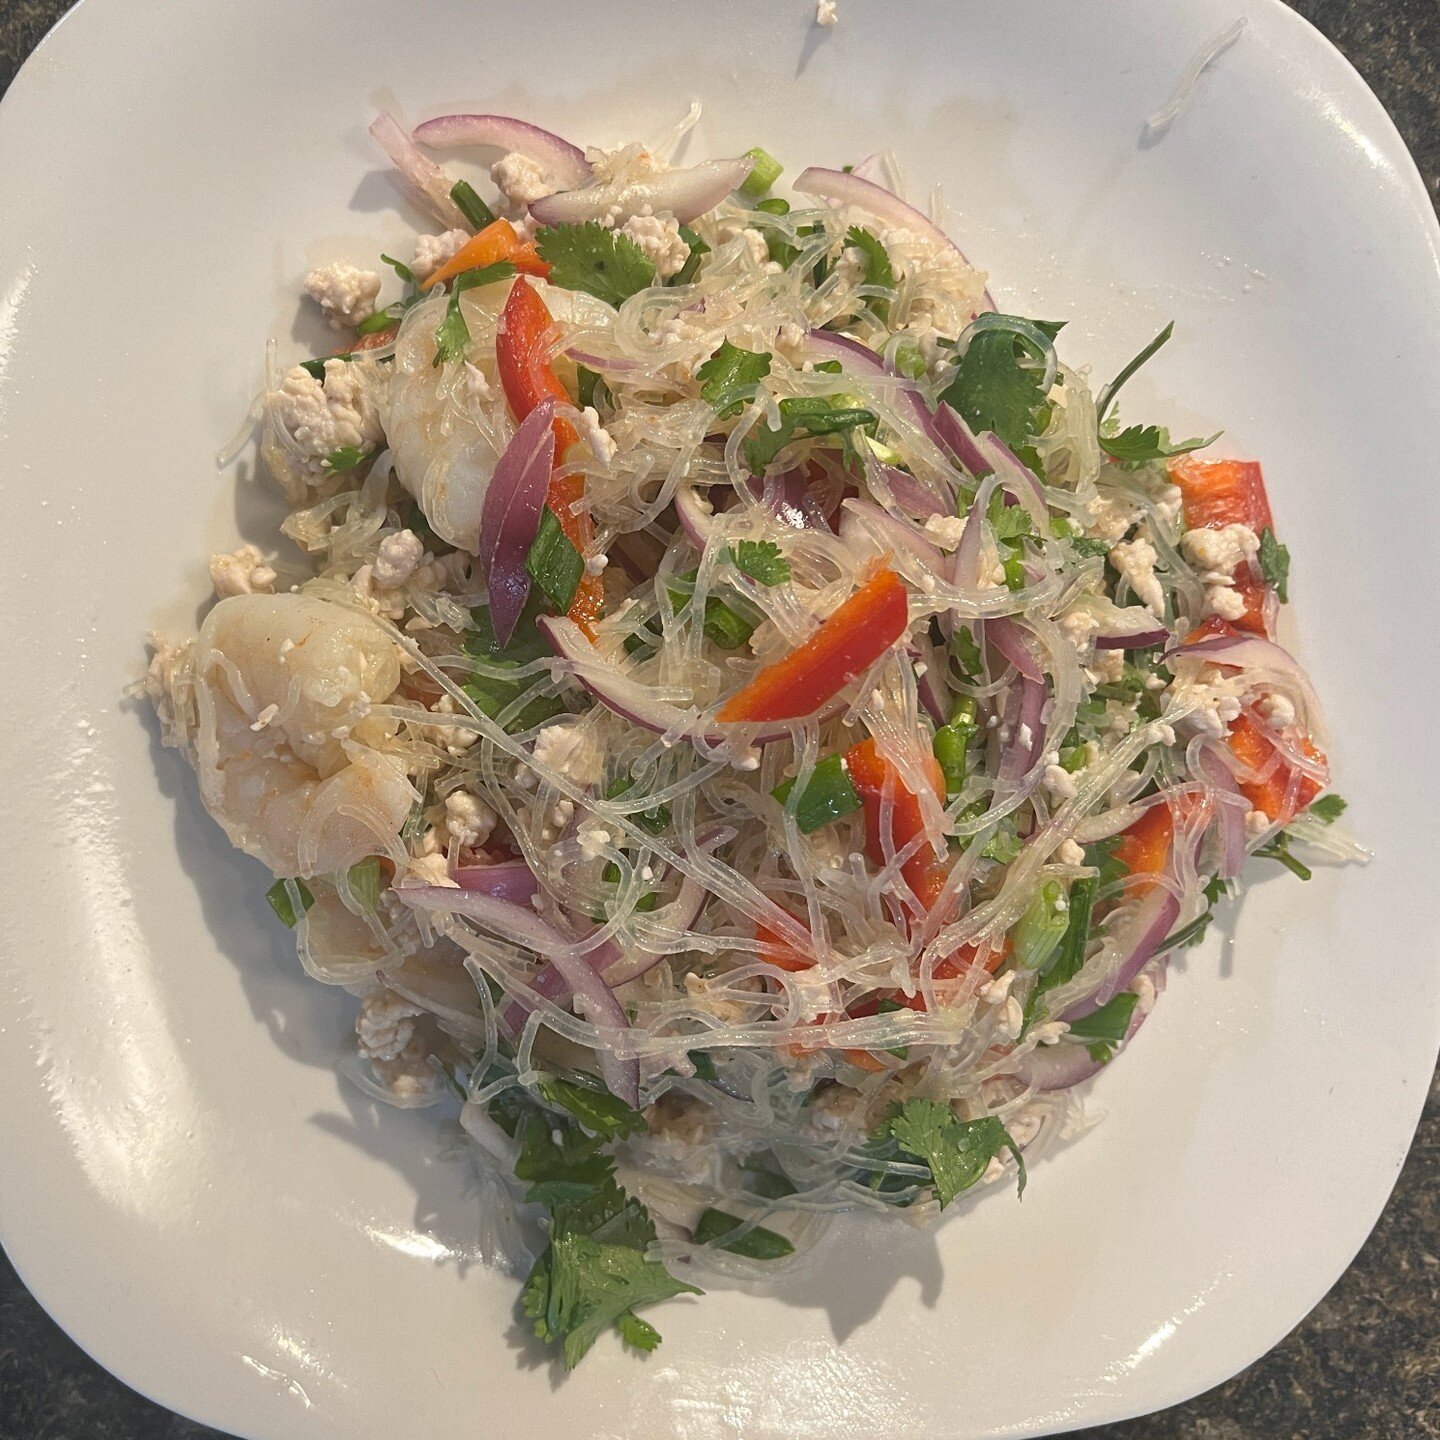 Weekly special is glass noodle salad! Come in and give it a try $15
Traditional Thai salad, featuring glass noodles, pork, shrimp, red pepper, red onion, and cilantro.
#weeklyspecial #glassnoodles #noodlesalad #thaifood #wilkesbarre #pittstonfood #et